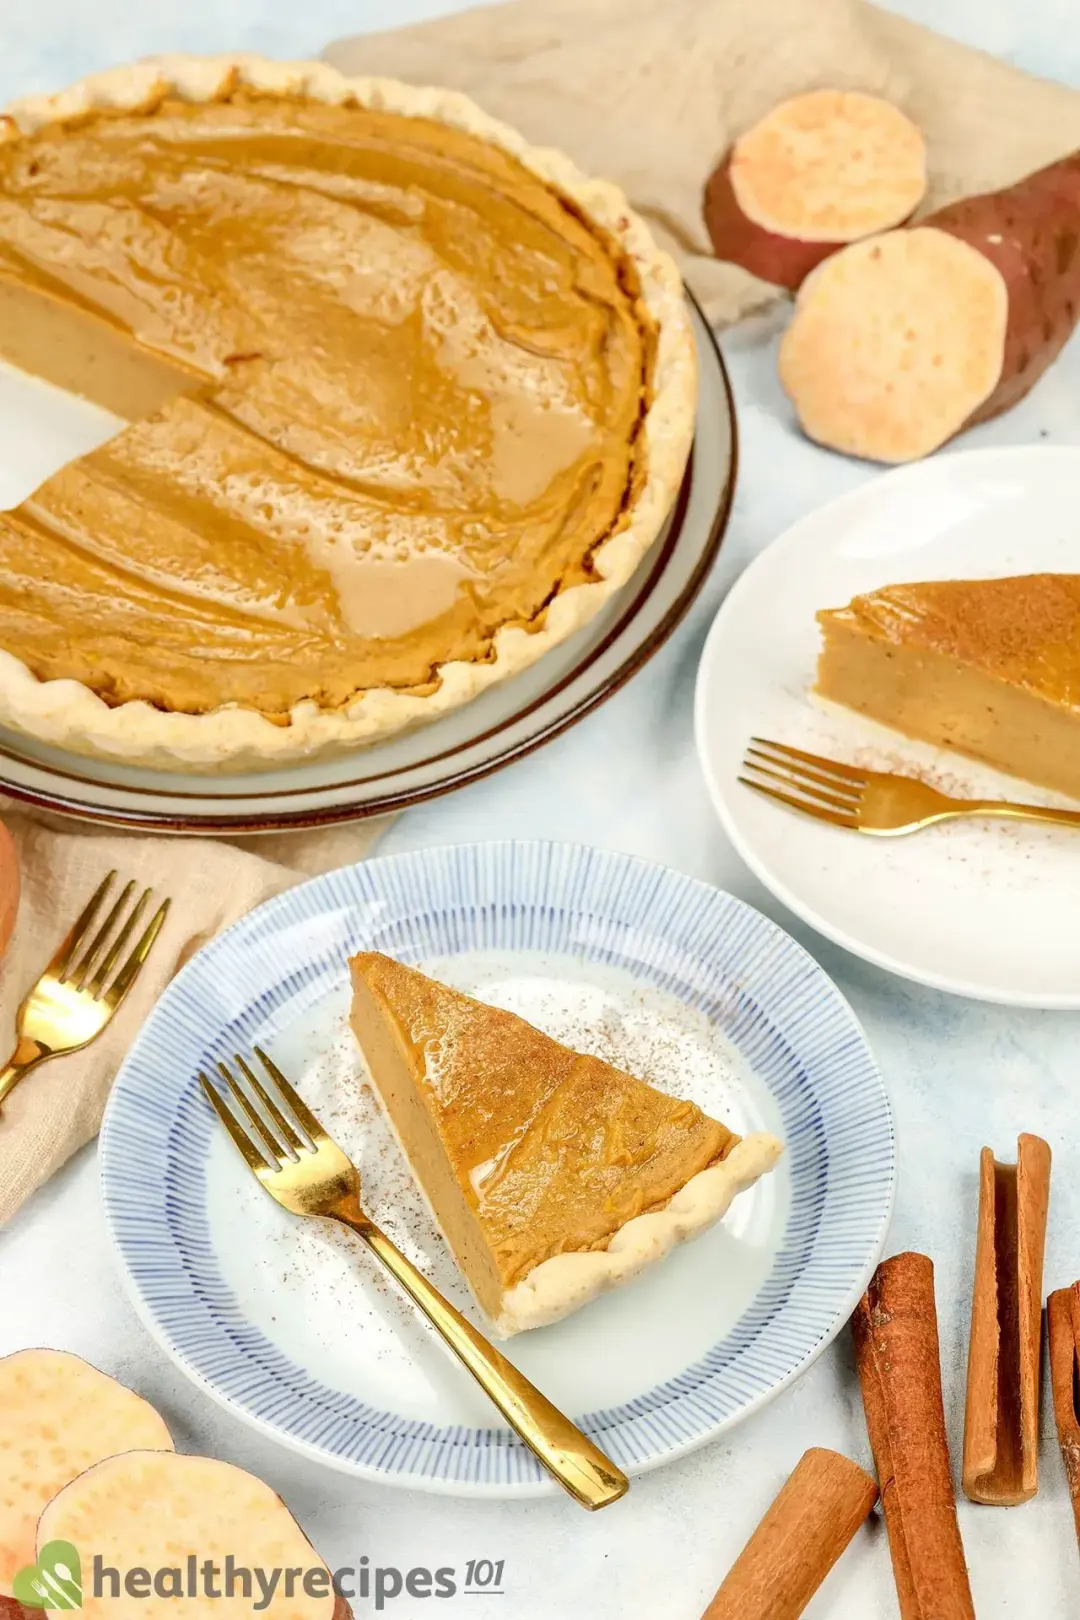 Slices of sweet potato pie and forks placed on plates near a large pie, surrounded by cinnamon sticks and sliced sweet potatoes